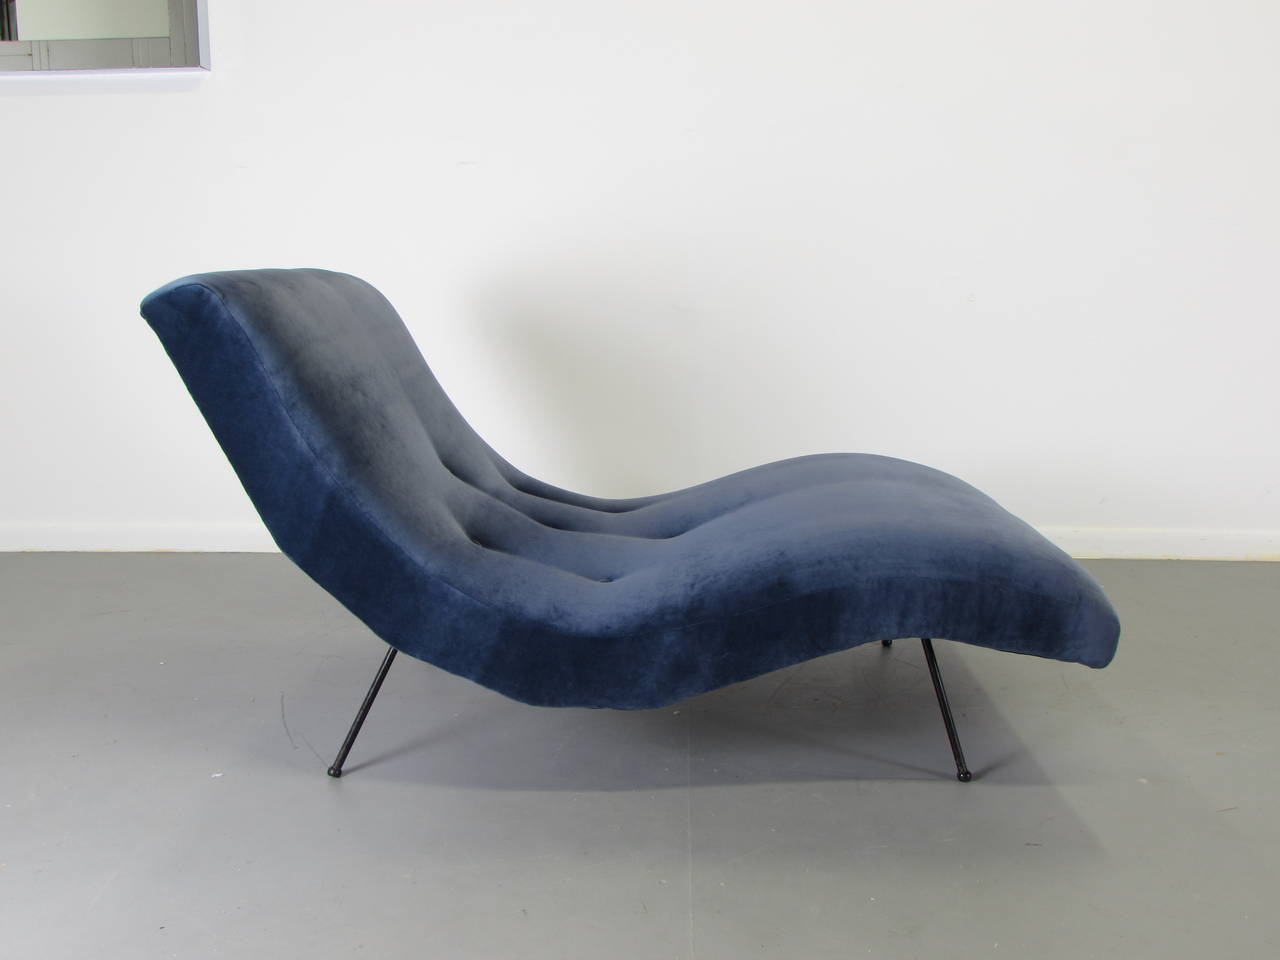 Large-scale, Wave lounge by Adrian Pearsall for Craft Associates. Newly upholstered in a deep blue velvet. This particular version with iron legs is rarely seen.

We offer free regular deliveries to NYC and Philadelphia area. Delivery to DC, MD,